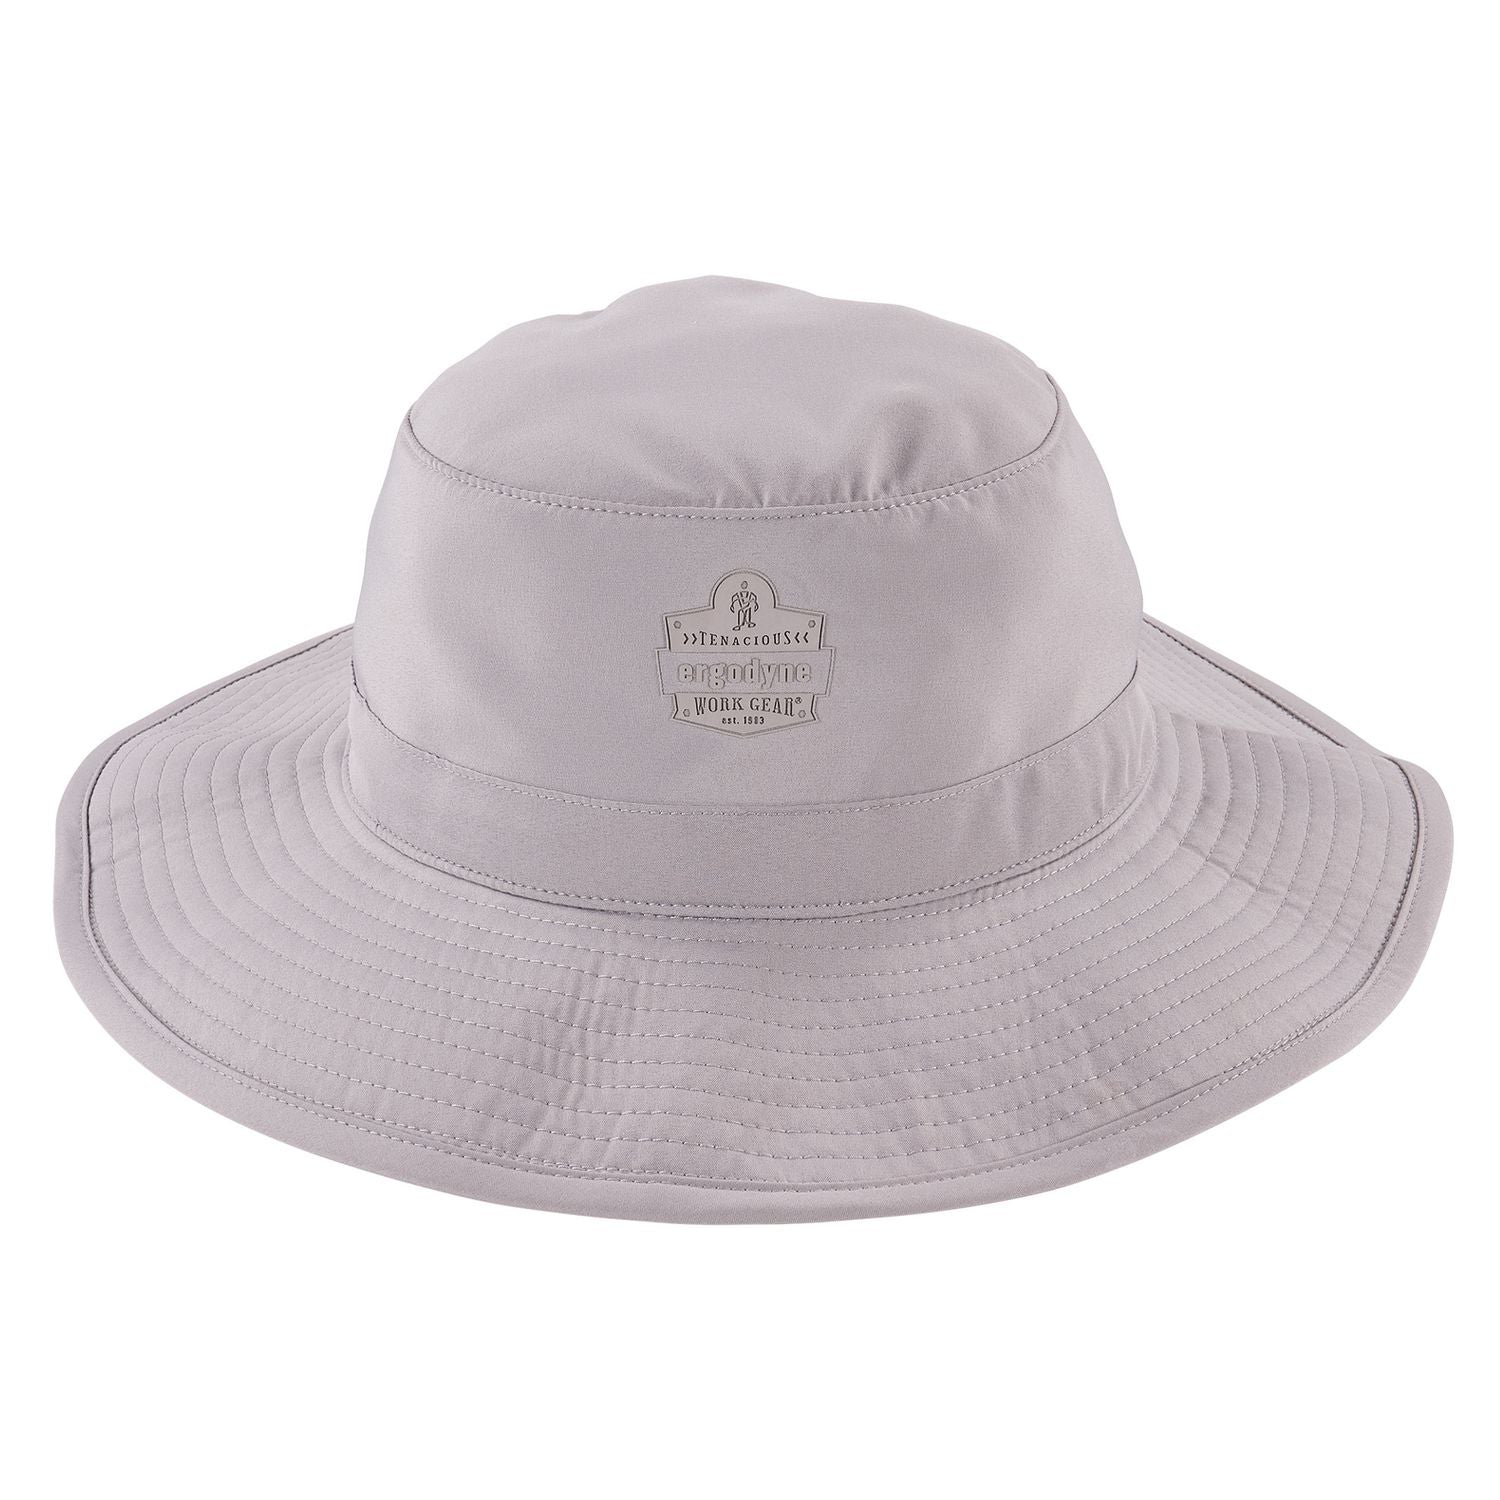 chill-its-8939-cooling-bucket-hat-polyester-spandex-one-size-fits-most-gray-ships-in-1-3-business-days_ego12666 - 1